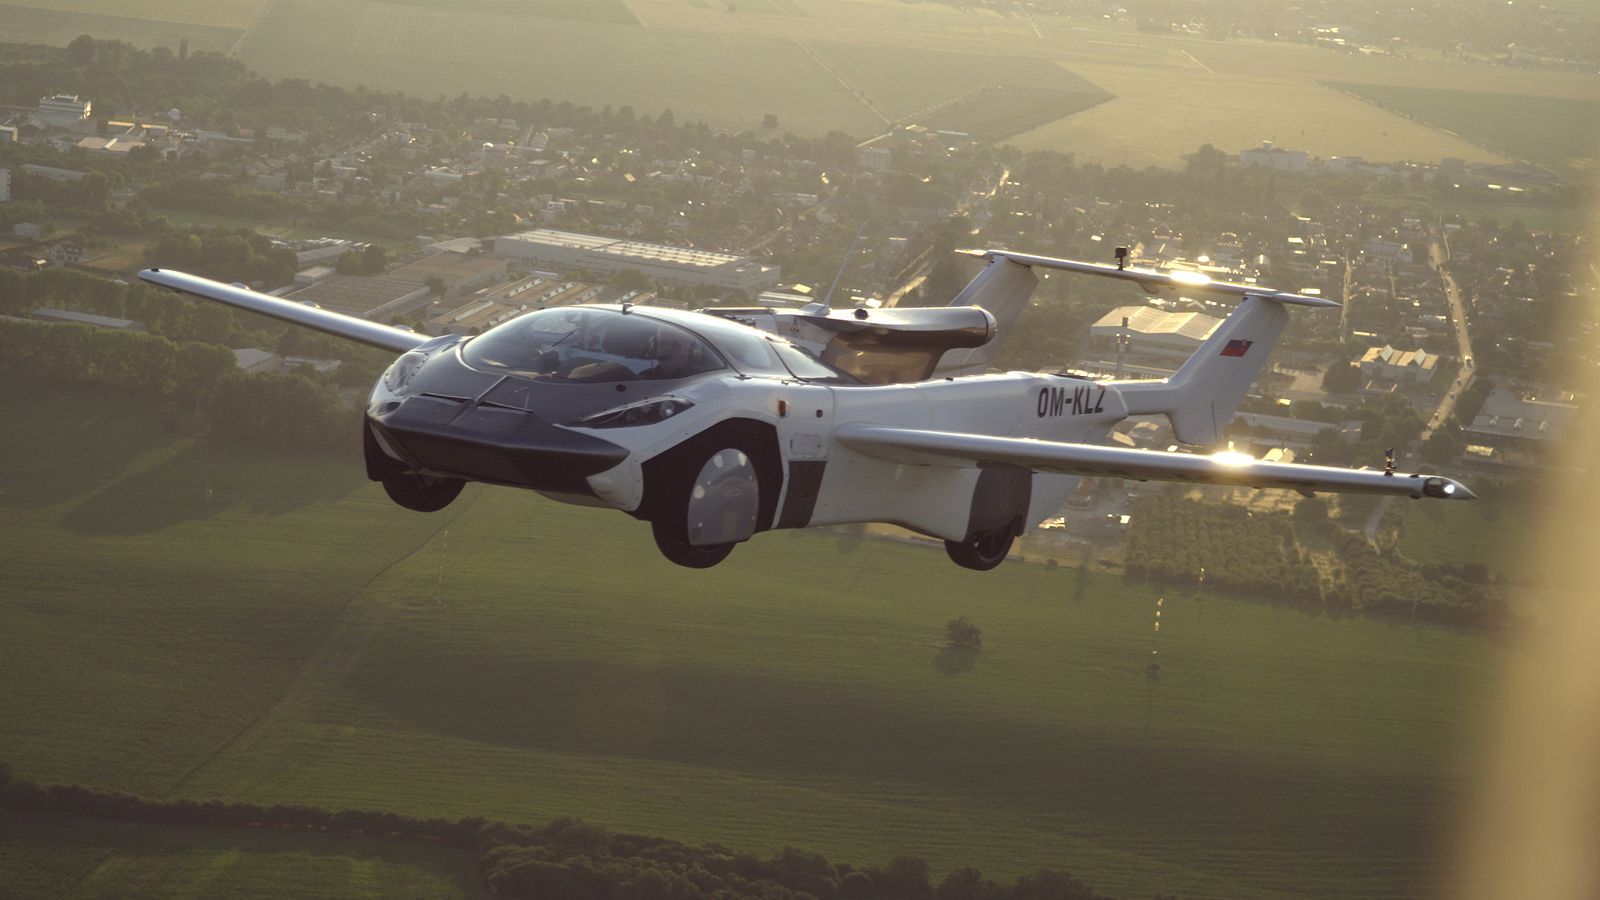 Music legend Jean-Michel Jarre becomes first passenger in KleinVision flying car